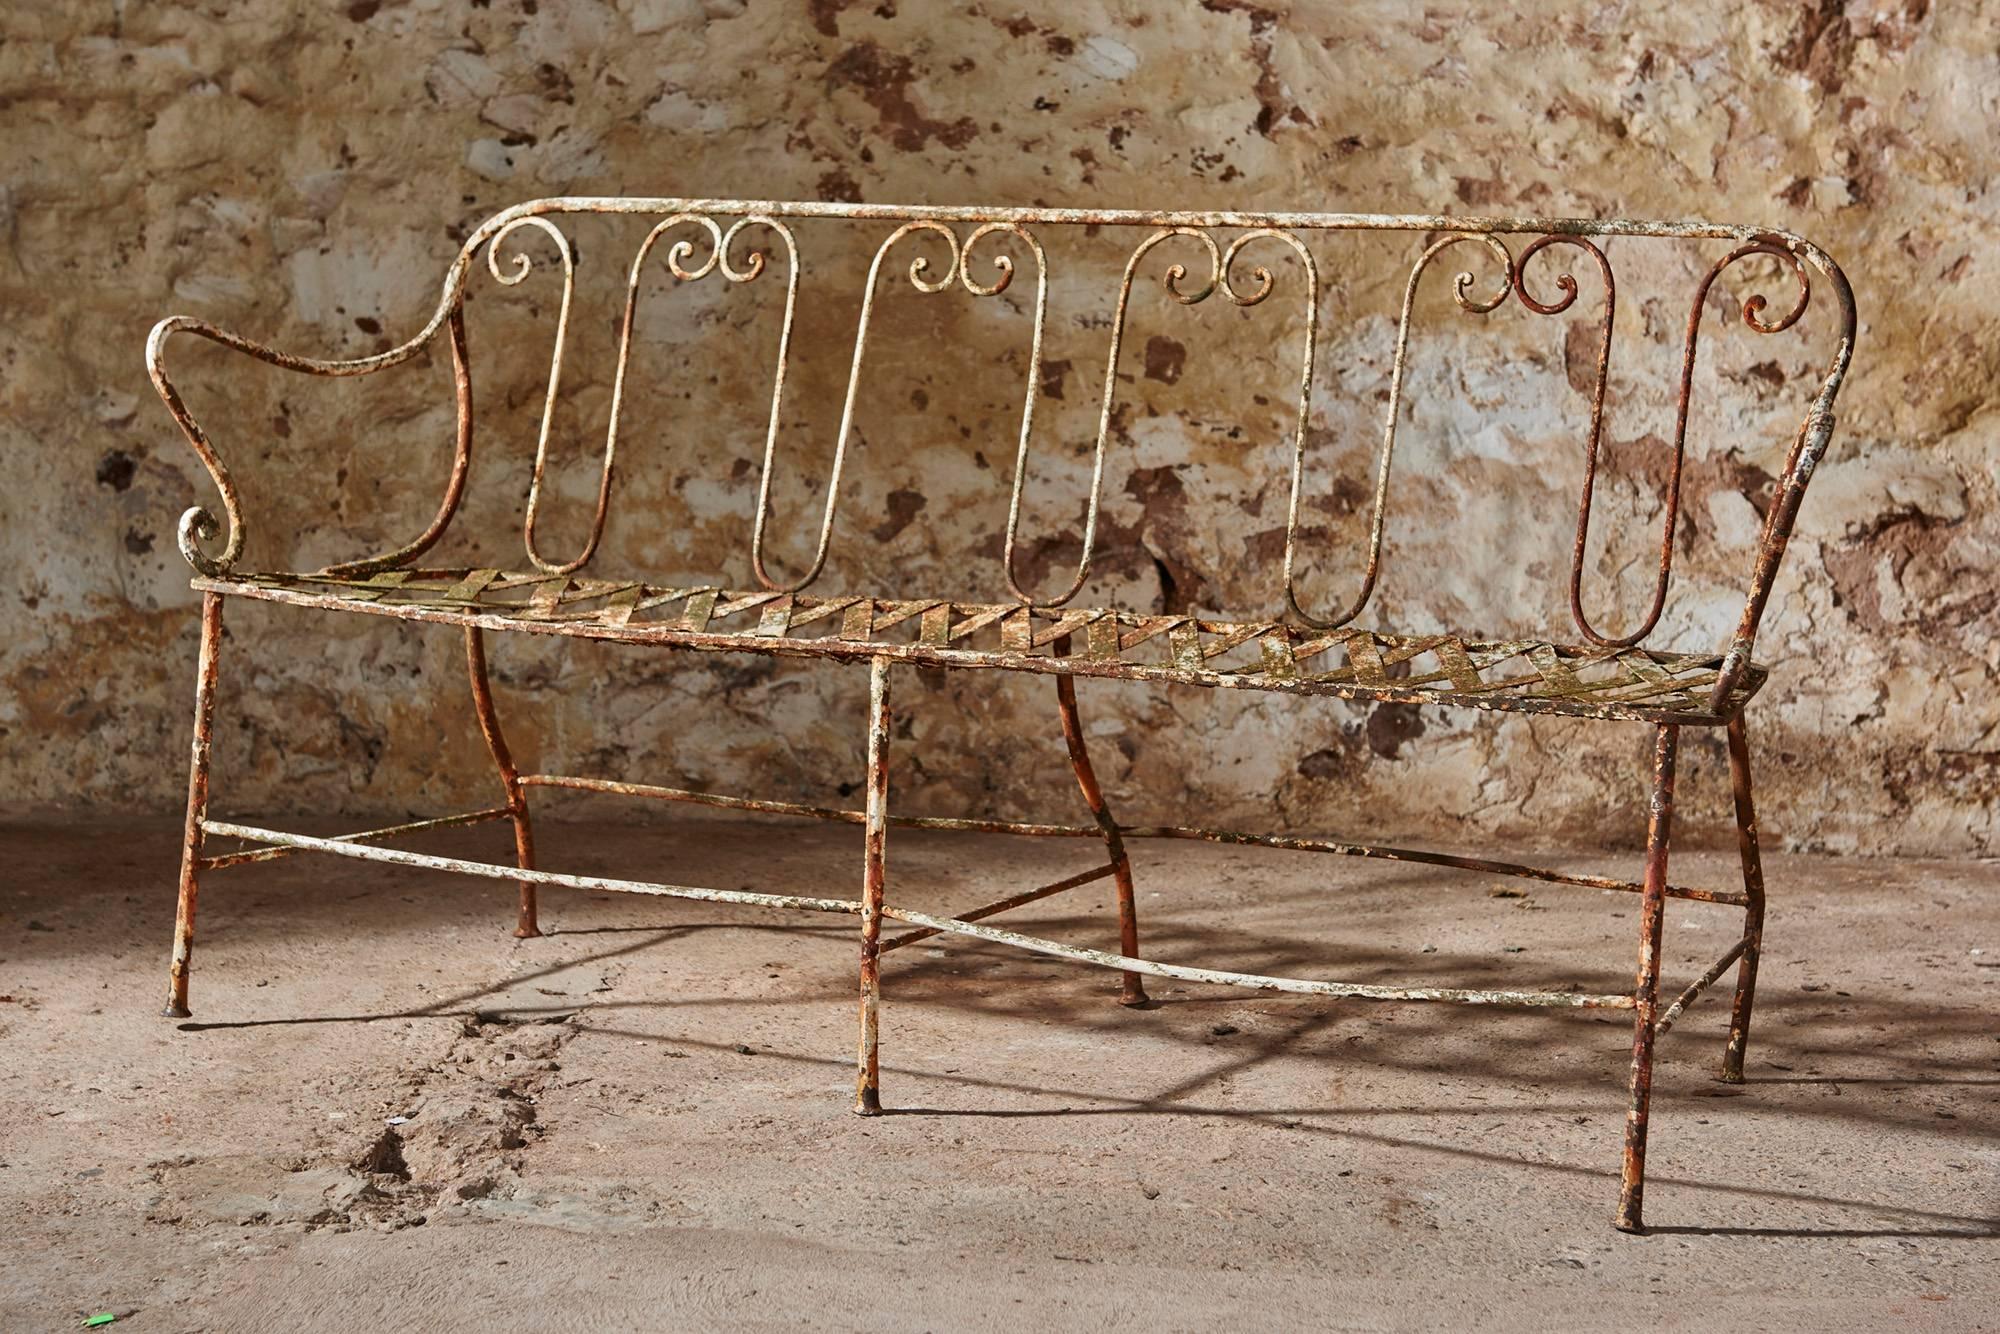 A very attractive wrought iron French garden bench in very good condition featuring an authentic original patina. This bench was manufactured in and around 1860 and has an attractive hand-forged scrolled back with a latticework seat. Its simple